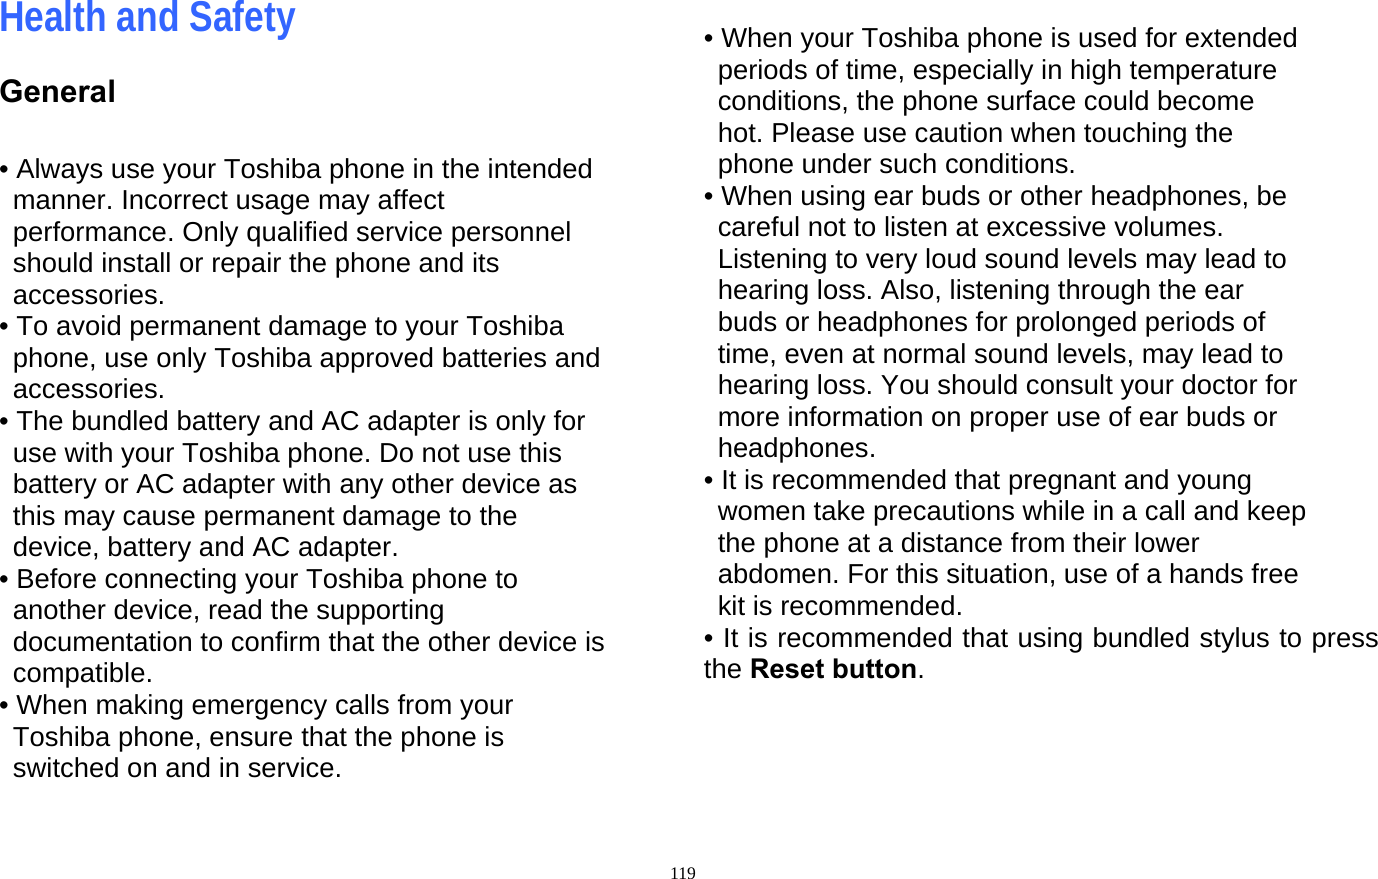  119Health and Safety General  • Always use your Toshiba phone in the intended manner. Incorrect usage may affect performance. Only qualified service personnel should install or repair the phone and its accessories. • To avoid permanent damage to your Toshiba phone, use only Toshiba approved batteries and accessories. • The bundled battery and AC adapter is only for use with your Toshiba phone. Do not use this   battery or AC adapter with any other device as this may cause permanent damage to the device, battery and AC adapter. • Before connecting your Toshiba phone to another device, read the supporting documentation to confirm that the other device is compatible. • When making emergency calls from your Toshiba phone, ensure that the phone is switched on and in service.  • When your Toshiba phone is used for extended periods of time, especially in high temperature conditions, the phone surface could become hot. Please use caution when touching the phone under such conditions. • When using ear buds or other headphones, be careful not to listen at excessive volumes. Listening to very loud sound levels may lead to hearing loss. Also, listening through the ear buds or headphones for prolonged periods of time, even at normal sound levels, may lead to hearing loss. You should consult your doctor for more information on proper use of ear buds or headphones. • It is recommended that pregnant and young women take precautions while in a call and keep the phone at a distance from their lower abdomen. For this situation, use of a hands free kit is recommended. • It is recommended that using bundled stylus to press the Reset button.    